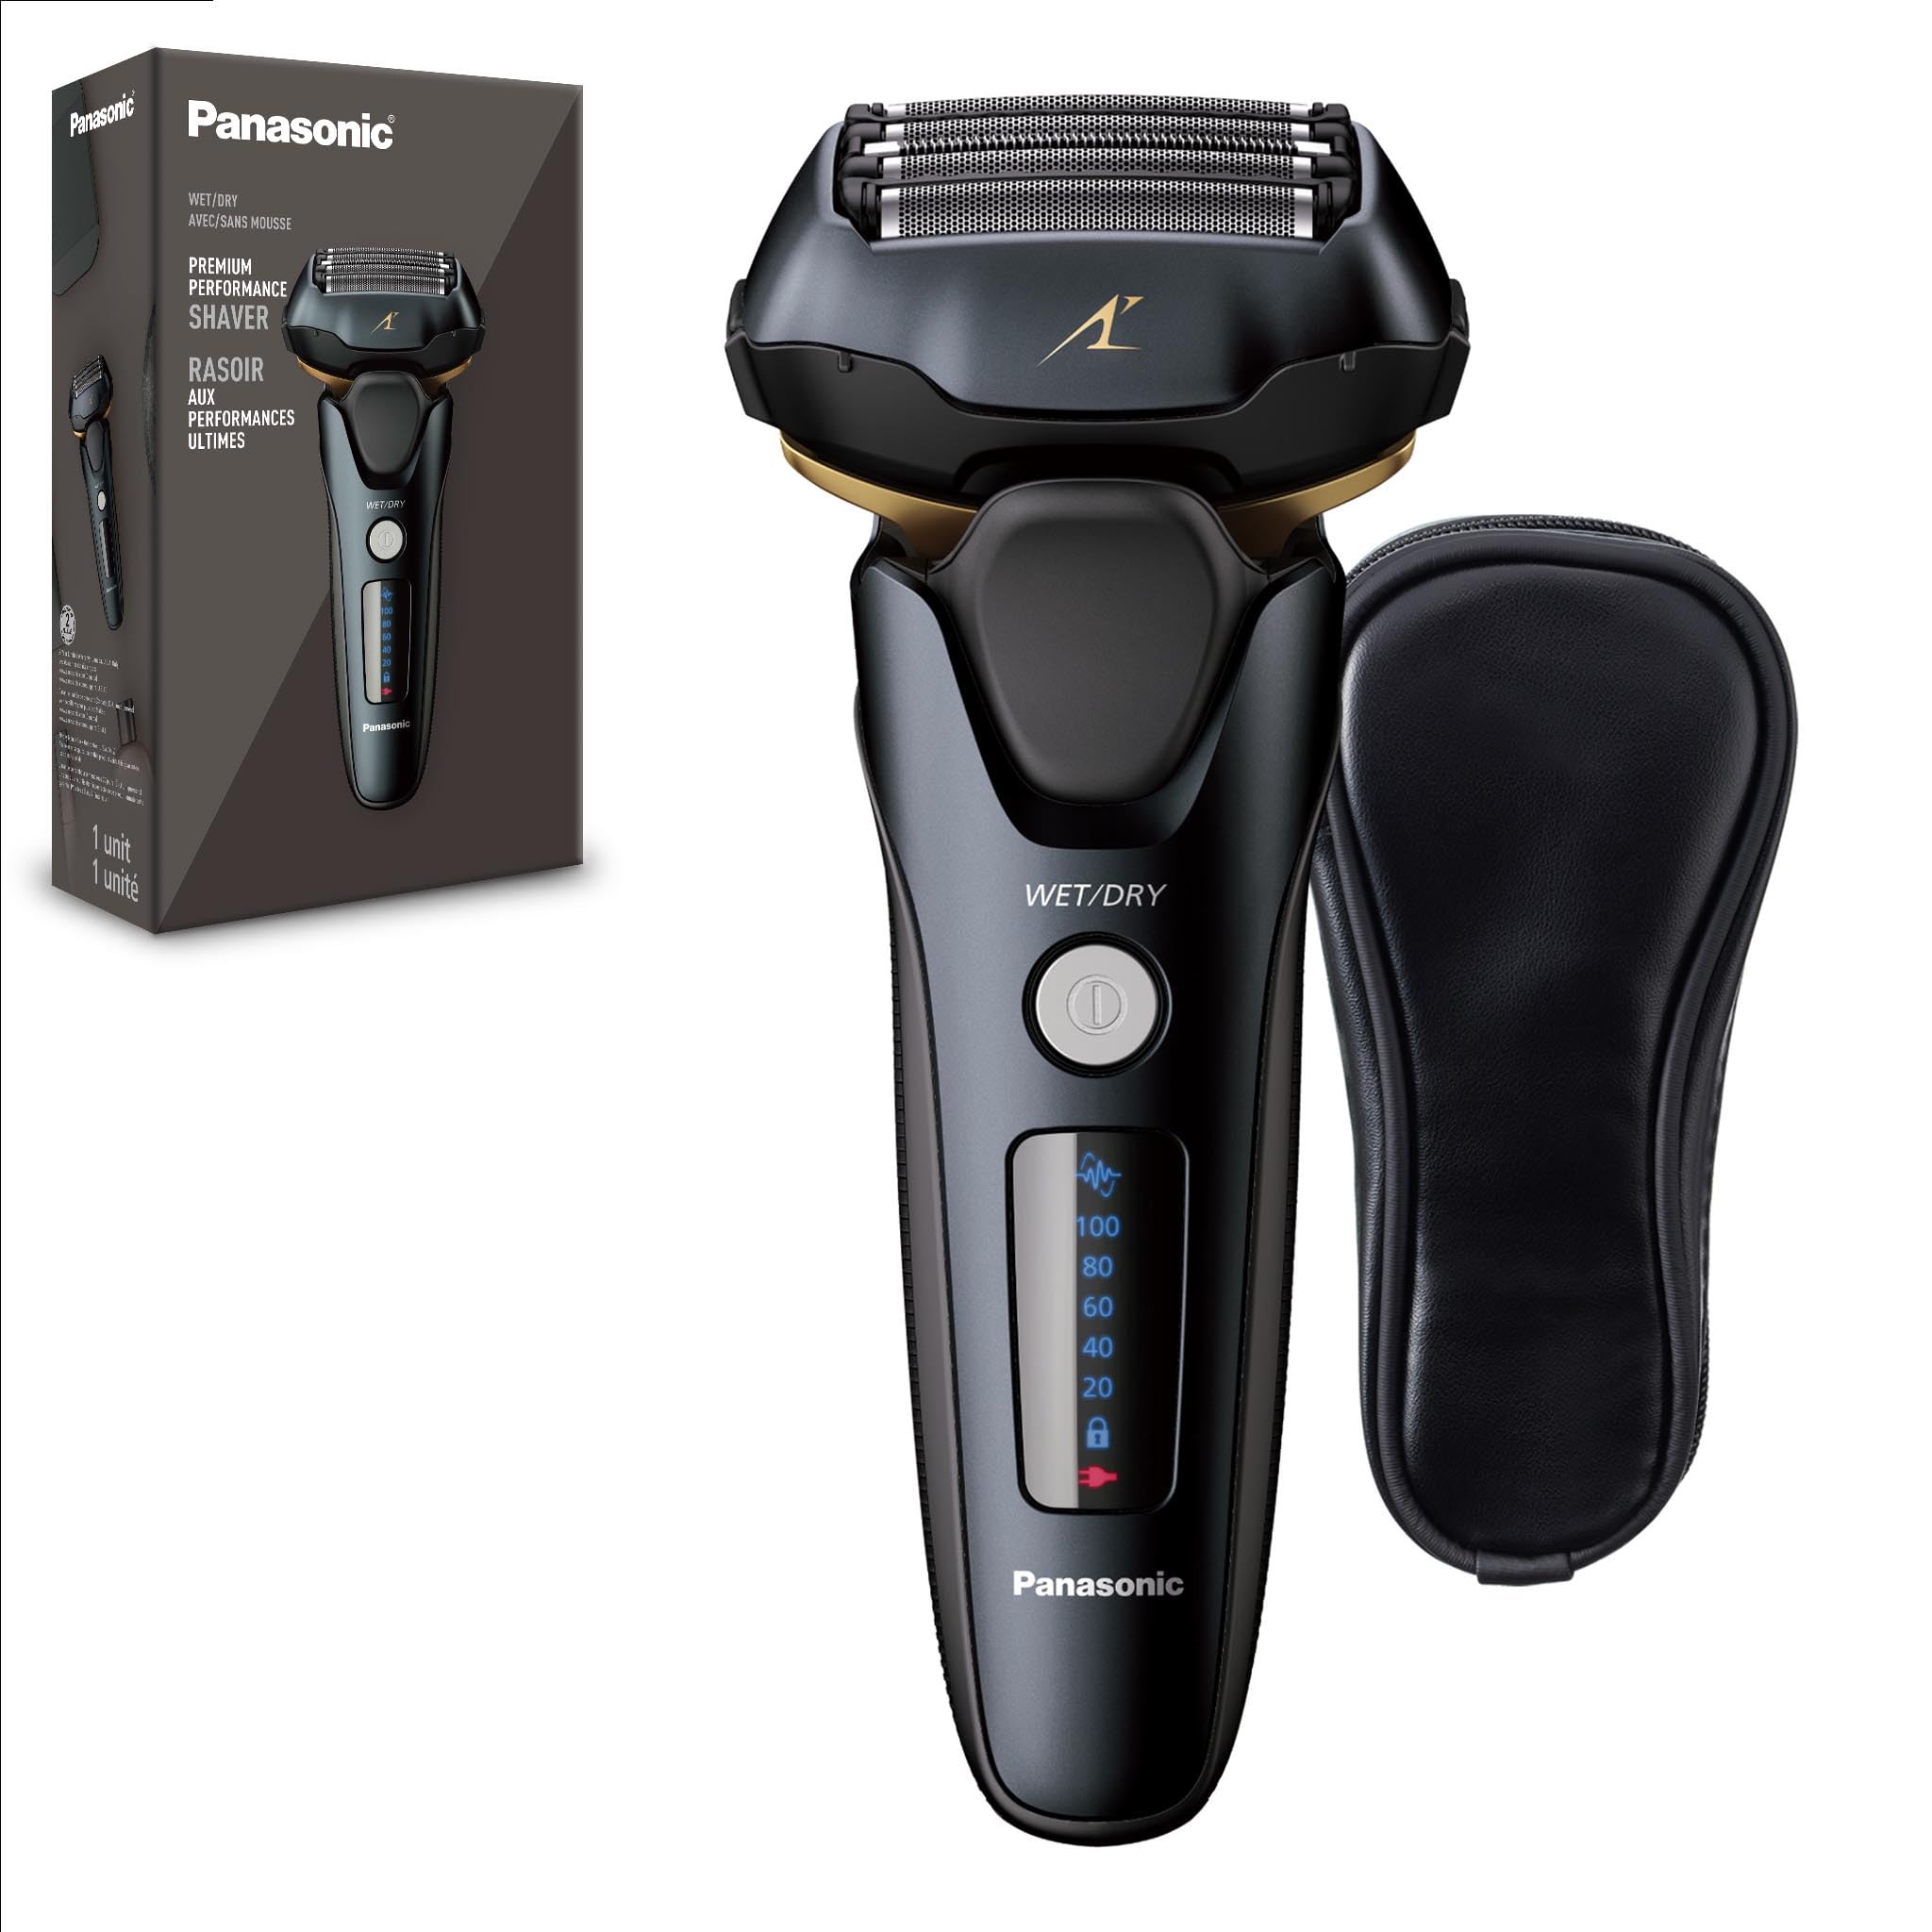 Panasonic ARC5 Electric Razor for Men with Pop-up Trimmer, Wet Dry 5-Blade Electric Shaver with Intelligent Shave Sensor and 16D Flexible Pivoting Head - ES-LV67-K (Black) $88.99